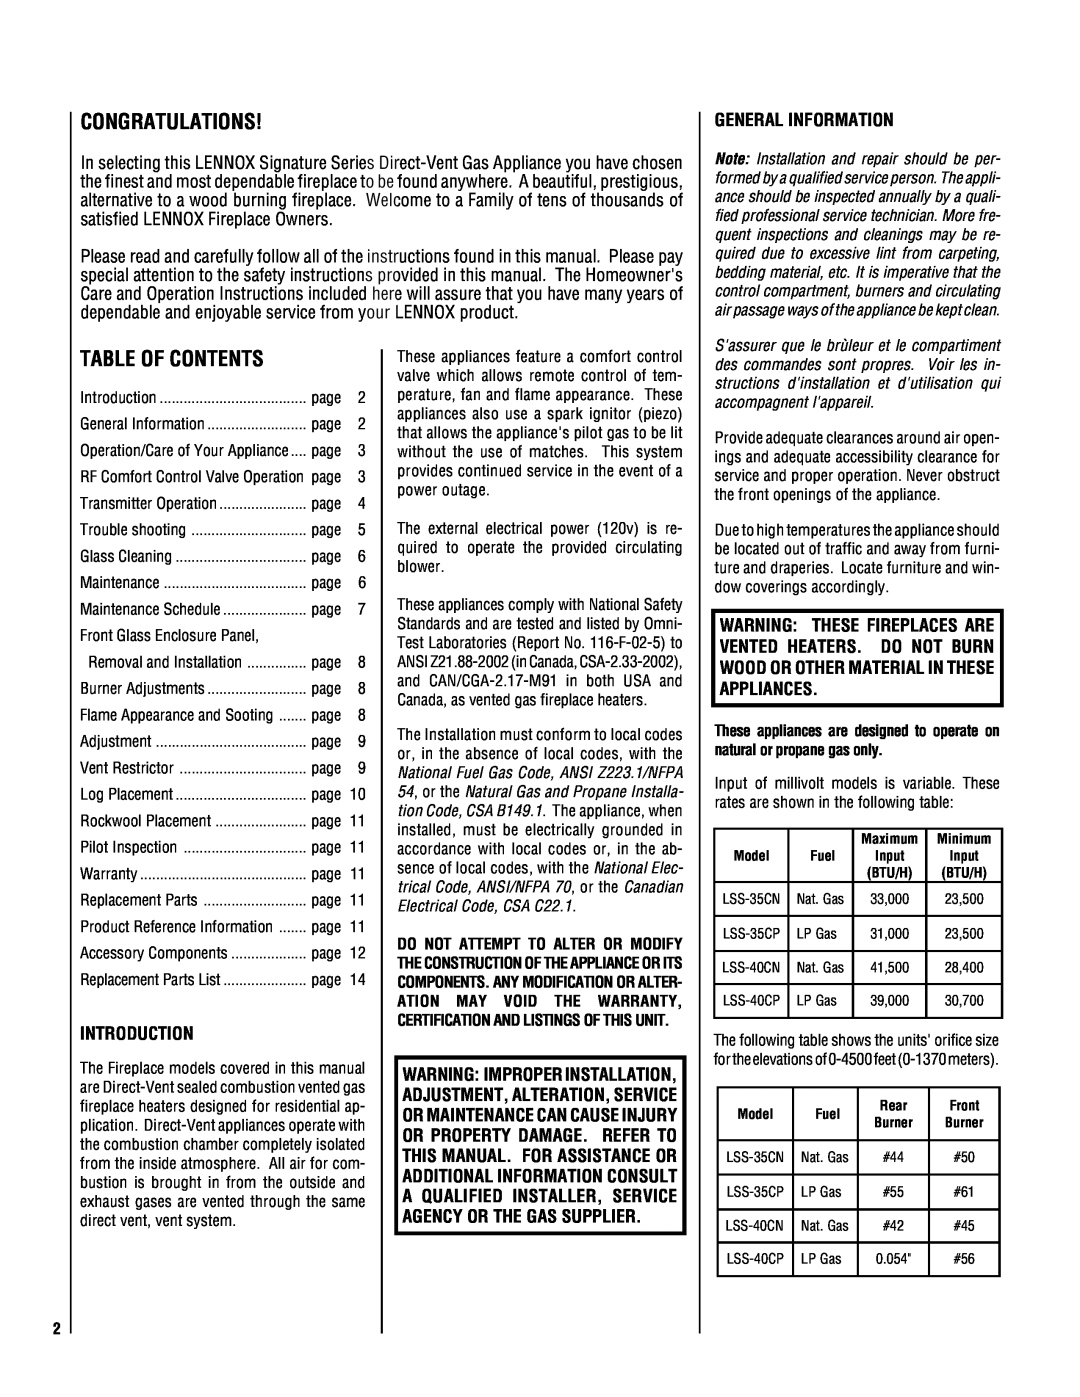 Magnavox LSS-40CP manual Congratulations, Table Of Contents, General Information, Introduction 